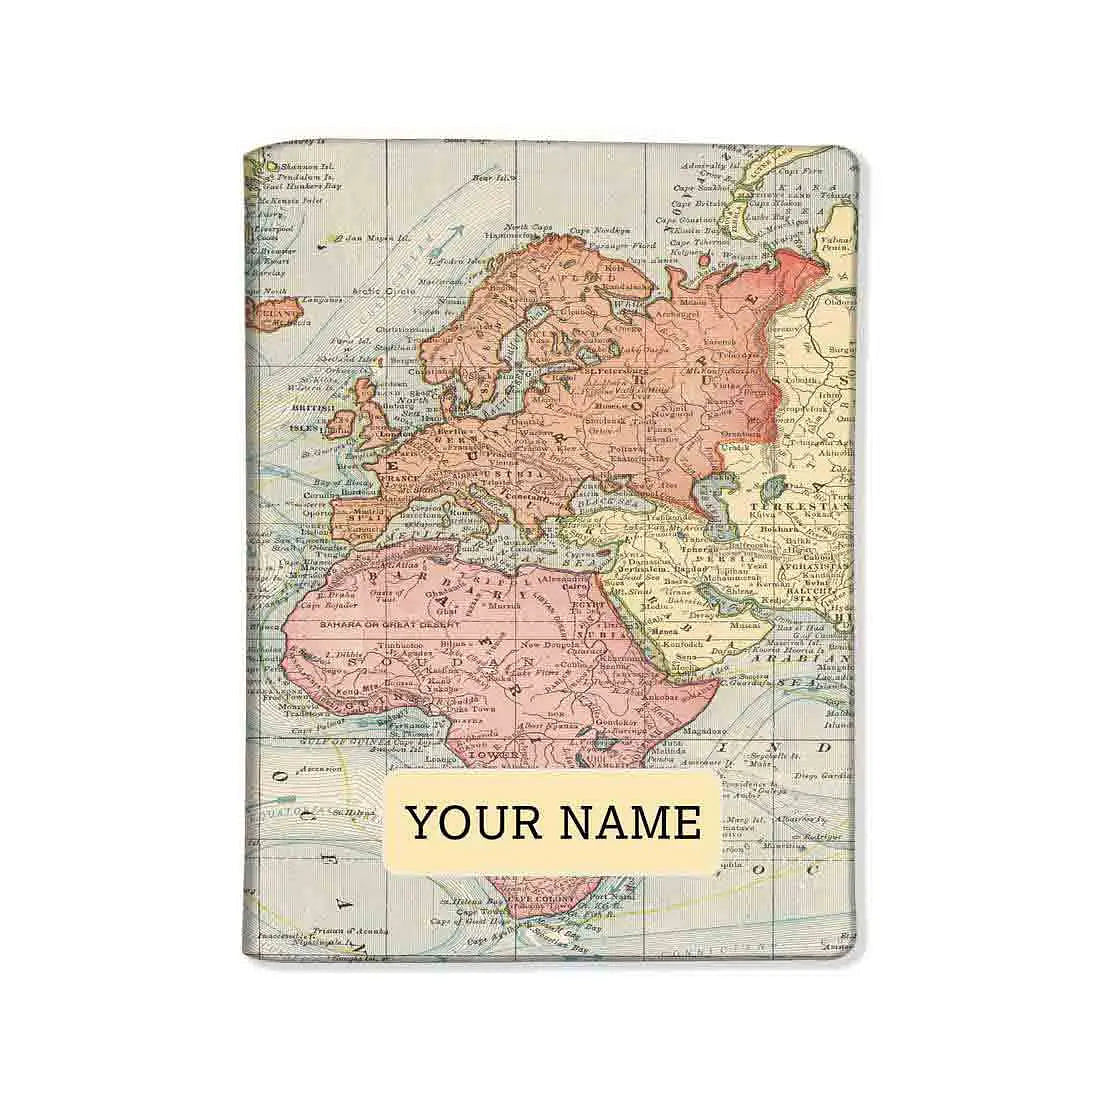 Customized Passport Holder Gifts for him under 500 - Vintage Map - Nutcase